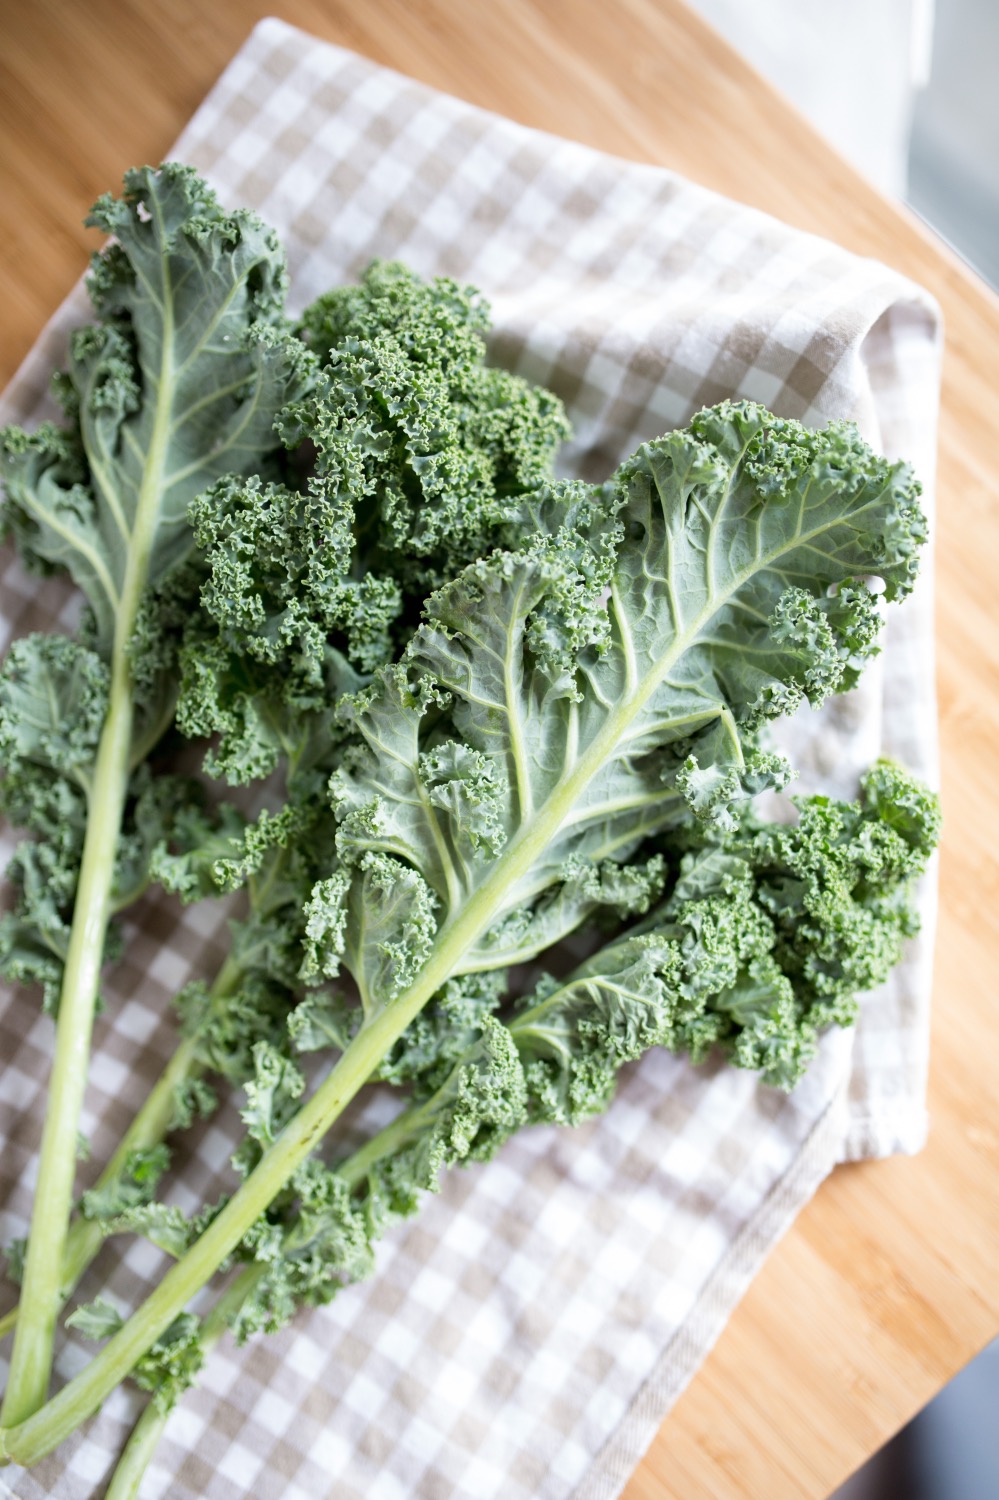 kale ingredients to make your own kale chips